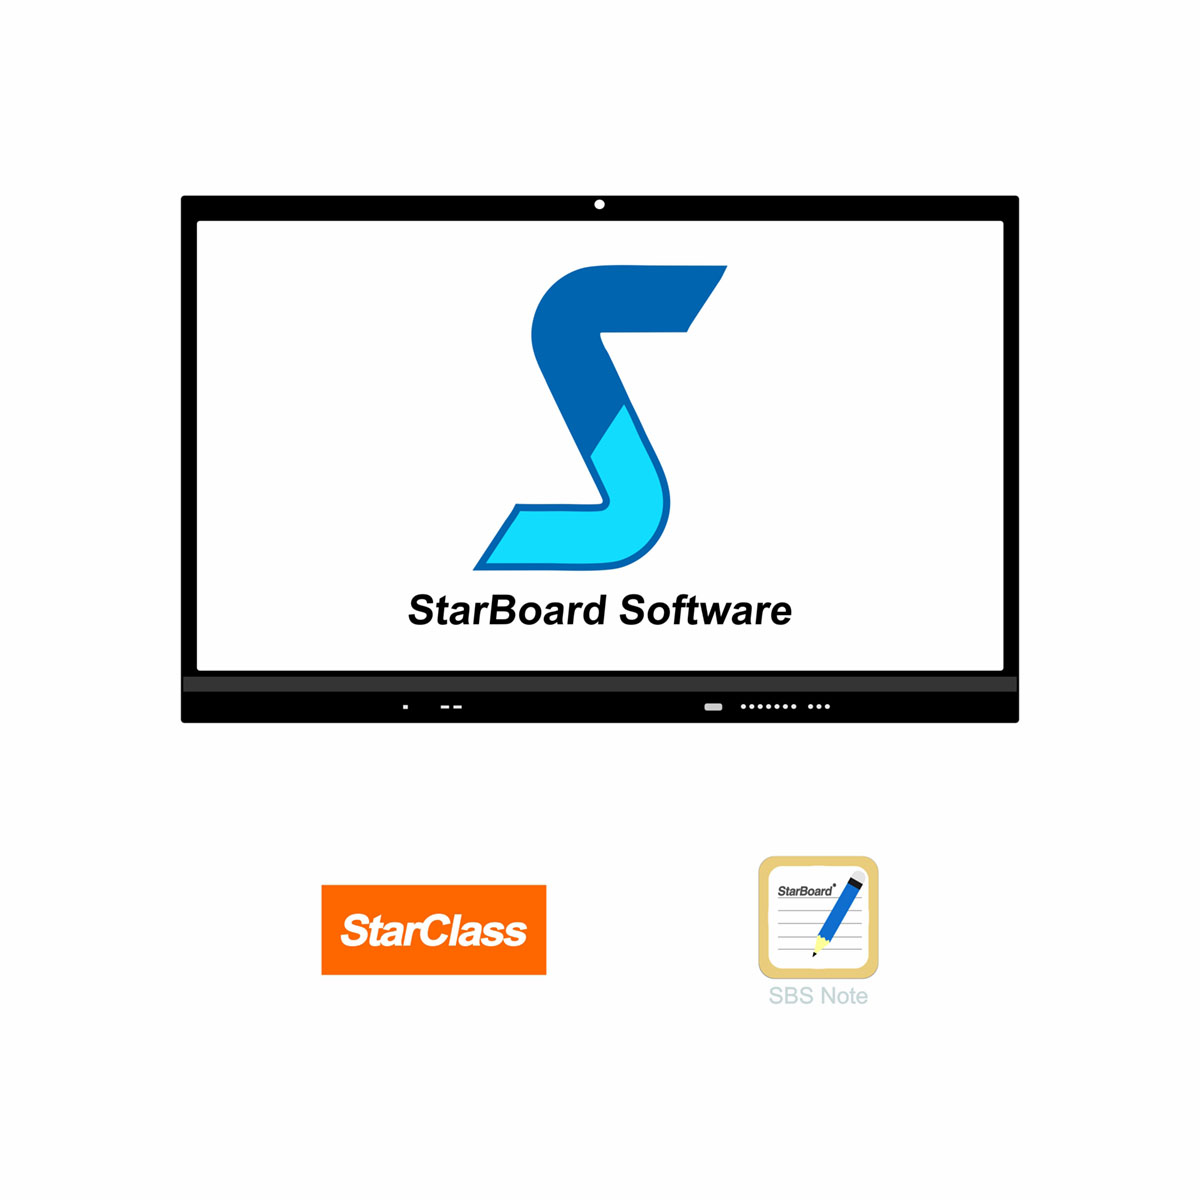 Downloads by StarBoard for hardware and software.